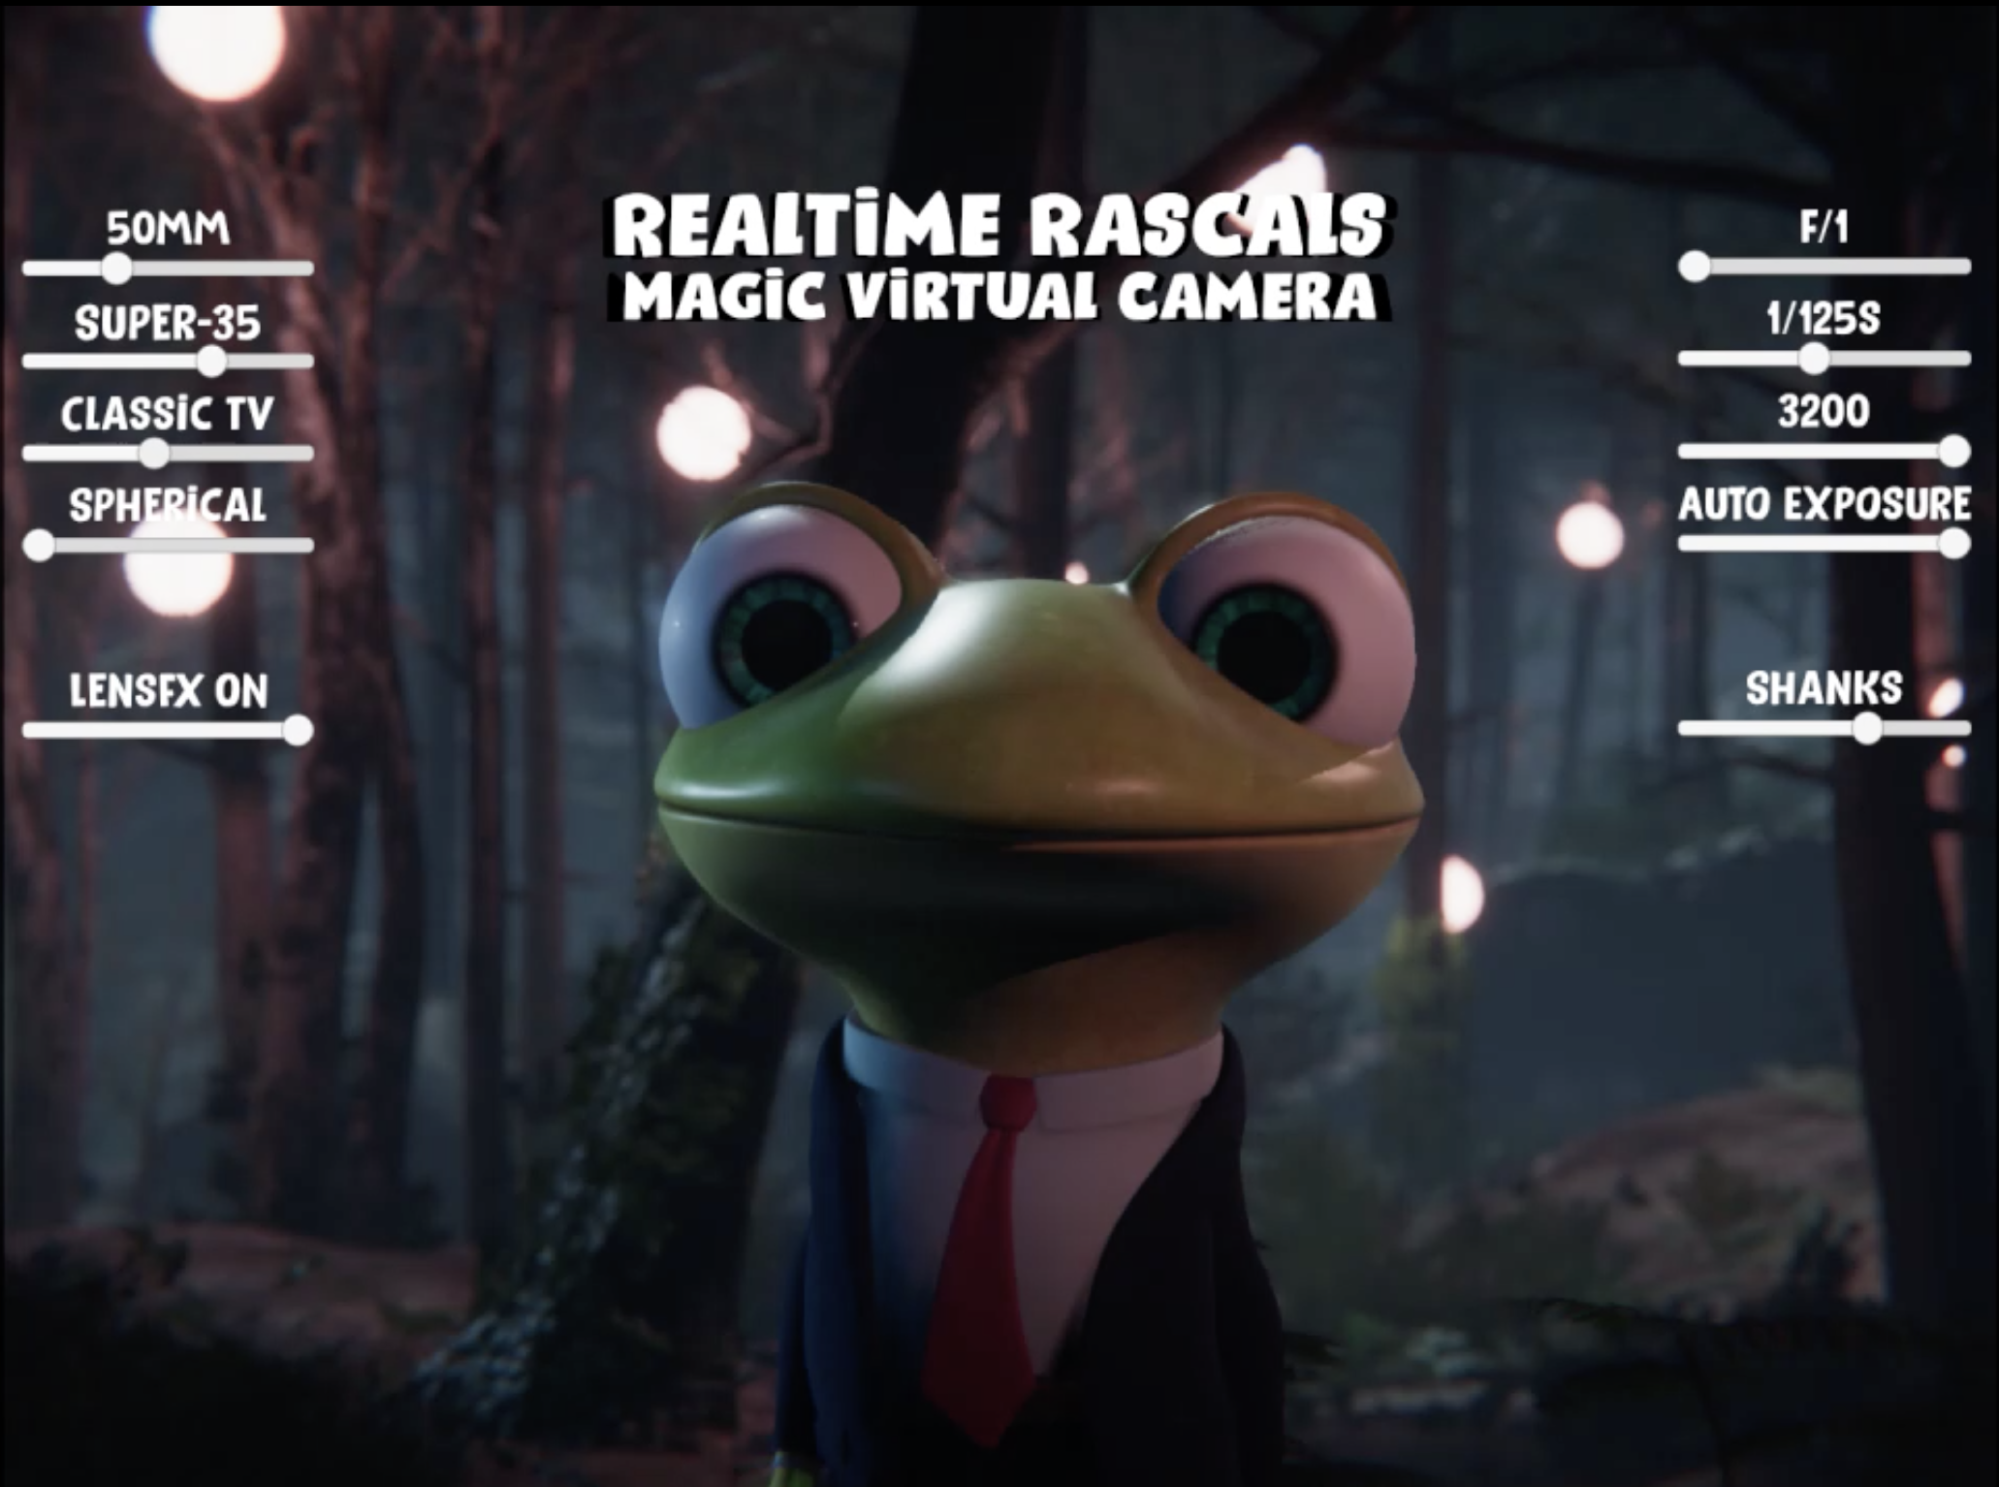 Frog staring at you/into camera with adjusters on either side of it and 'Realtime Rascals Magic Virtual Camera' above it. 